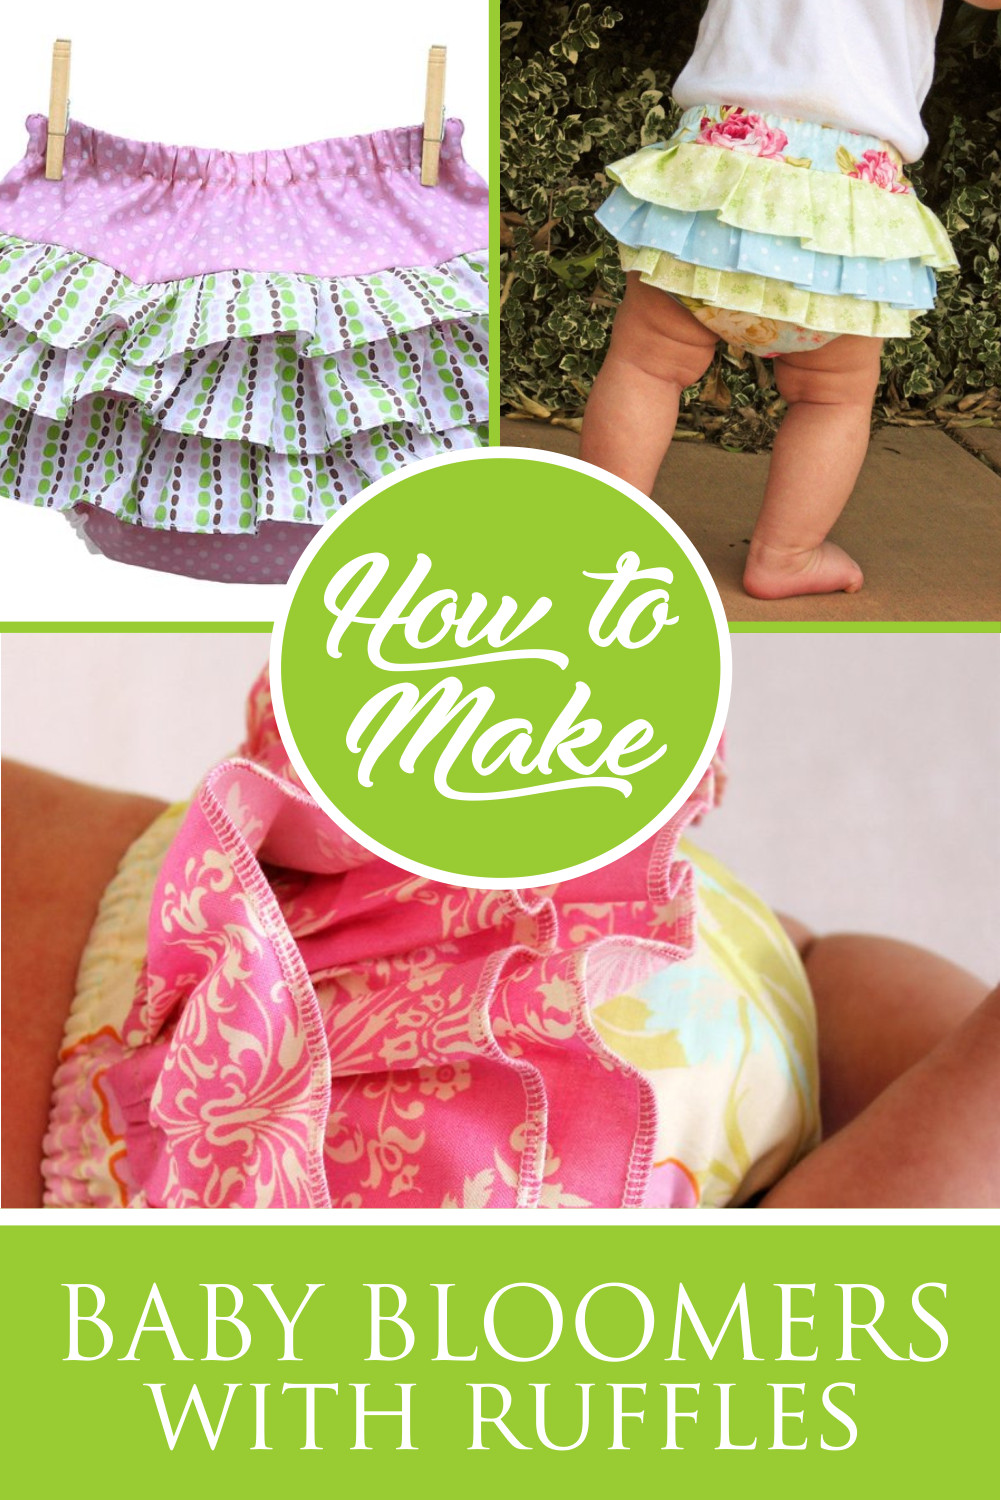 DIY Baby Bloomers
 How to Make Baby Bloomers with Ruffles